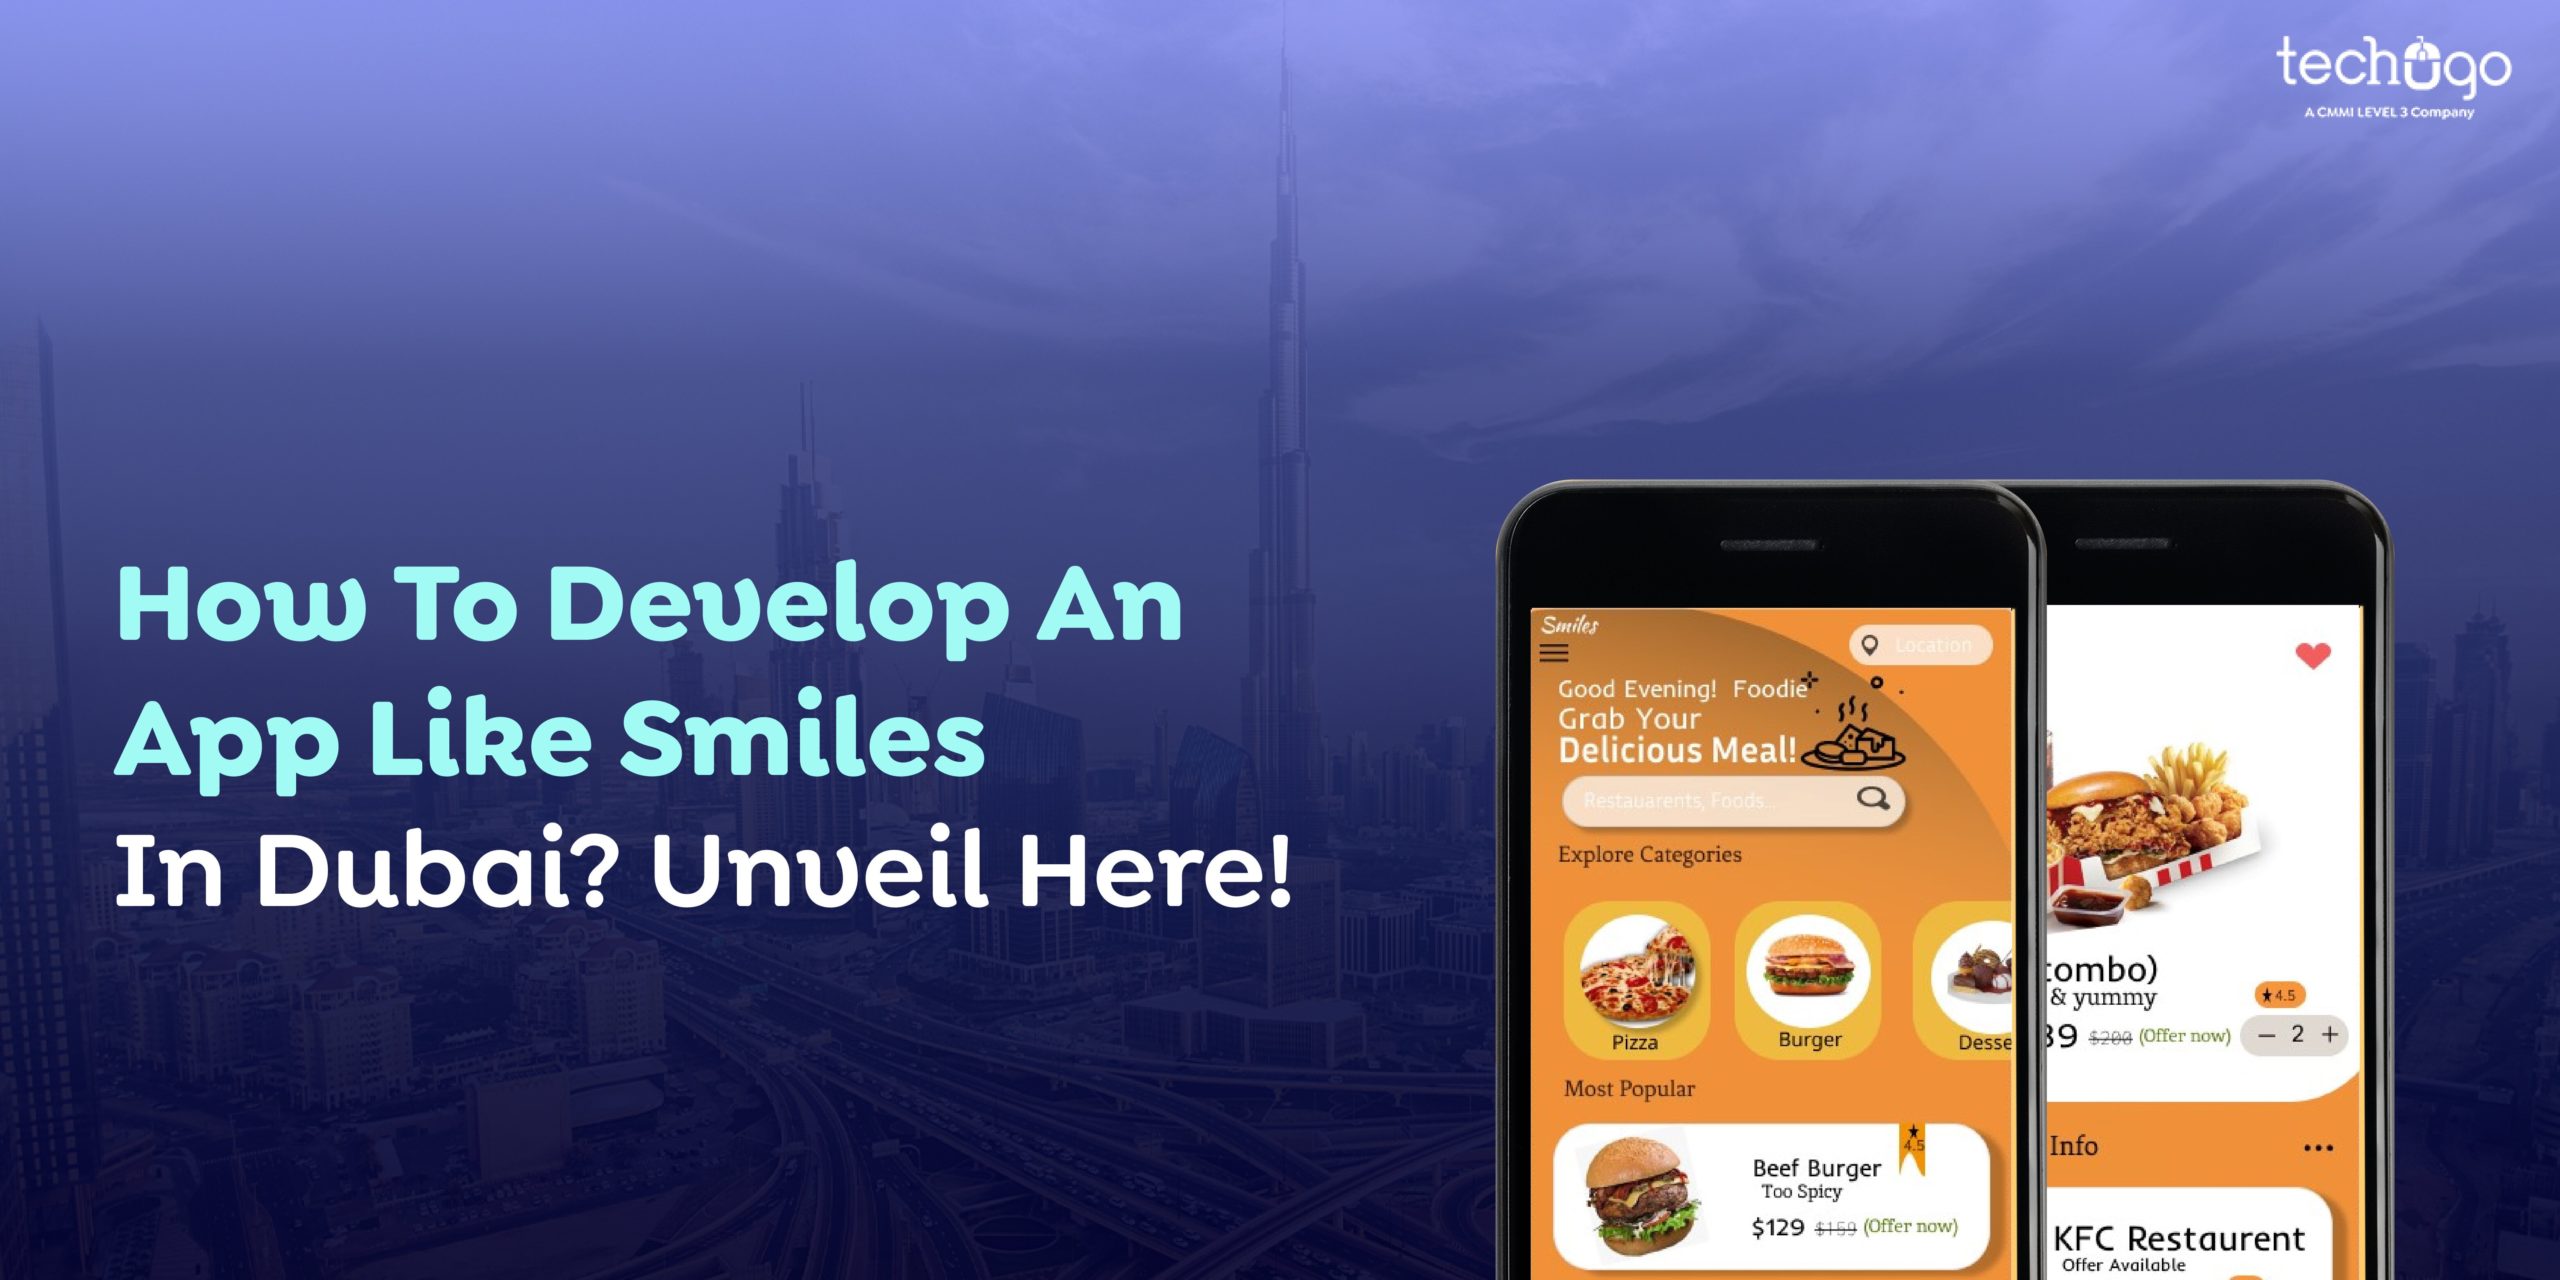 How To Develop An App Like Smiles In Dubai Unveil Here